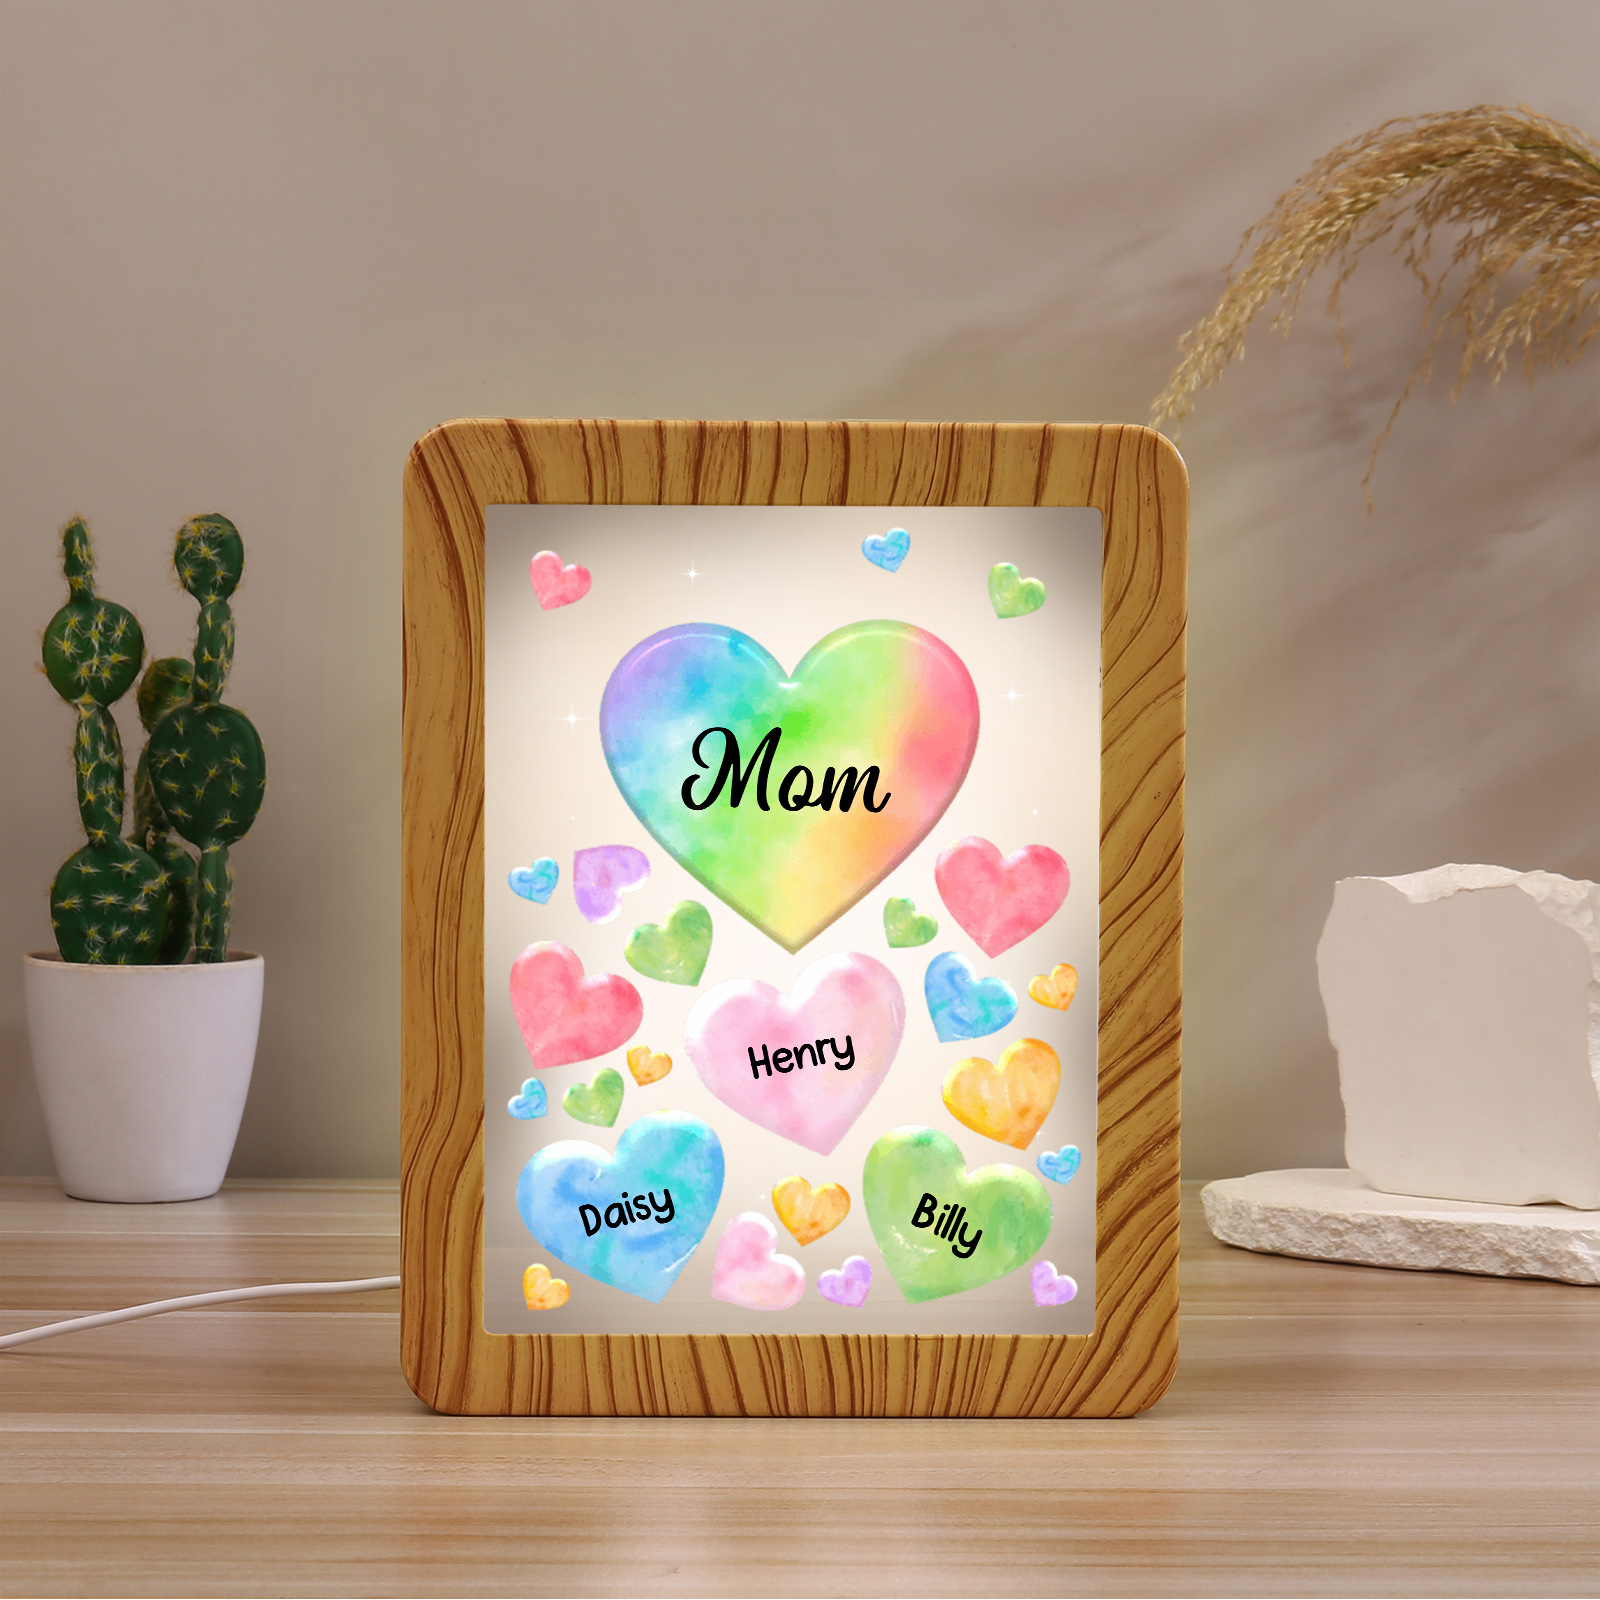 3 Names - Personalized Mom Home Wood Color Plug-in Mirror Photo Frame Custom Text LED Night Light Gift for Mom